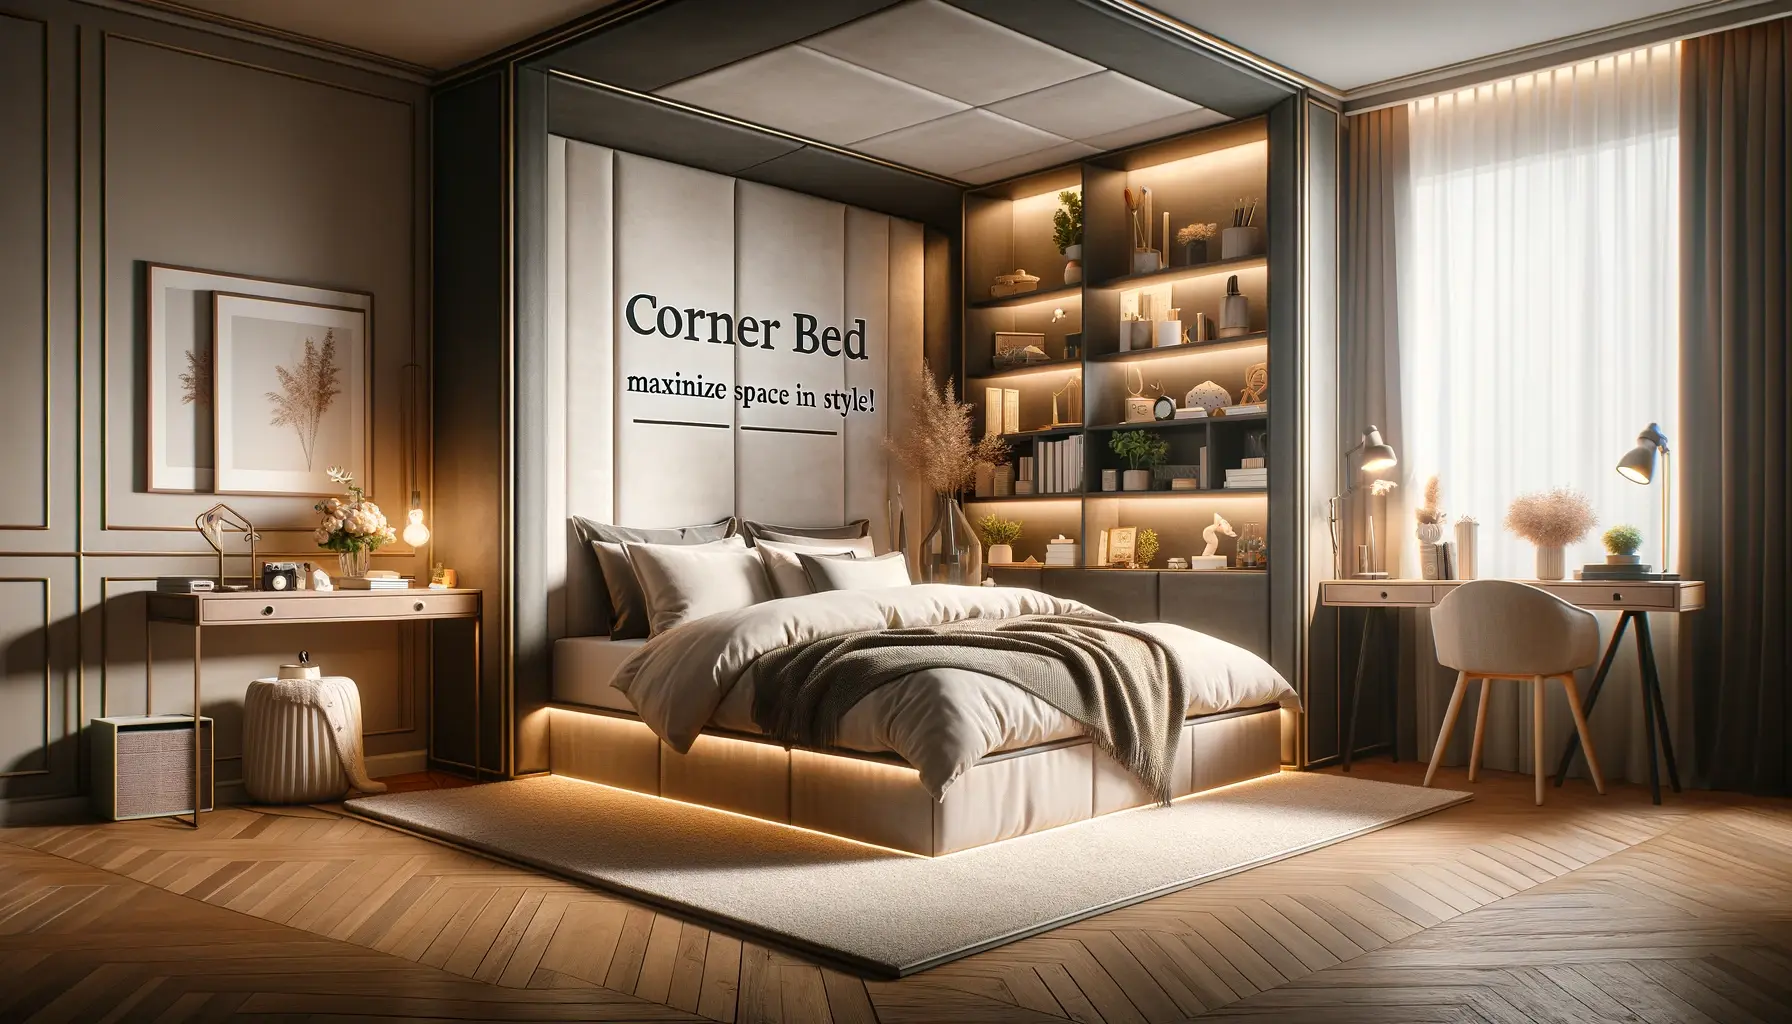 Corner Bed [Maximize Space in Style!]